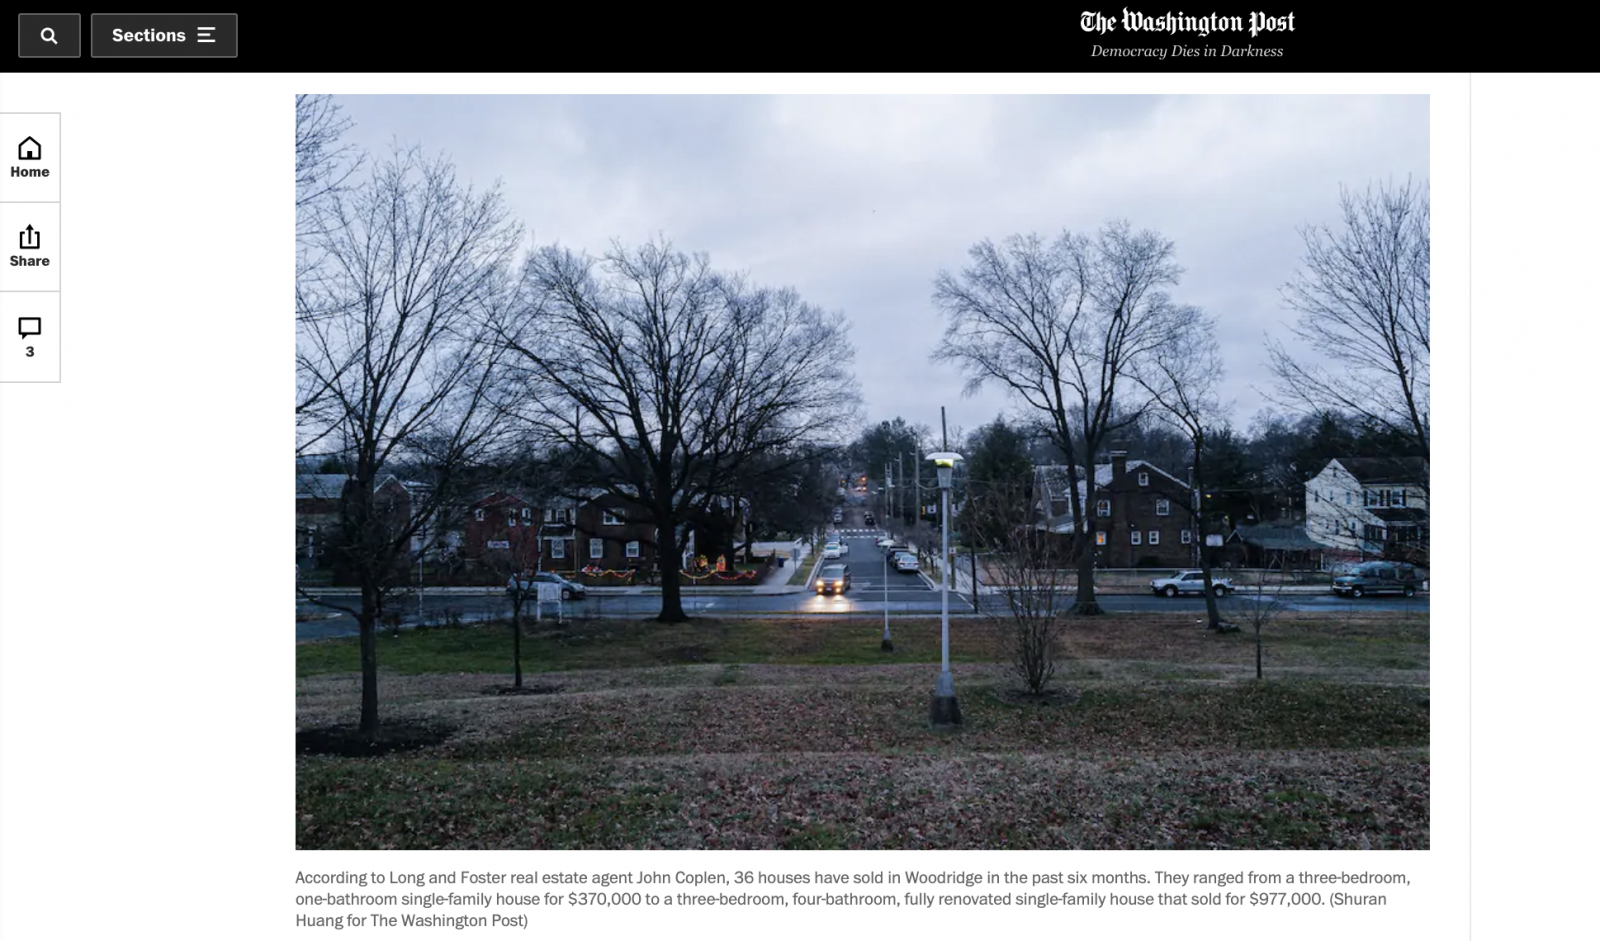 Thumbnail of On The Washington Post: Woodridge is a quiet corner of Northeast D.C. that is close to all the city has to offer